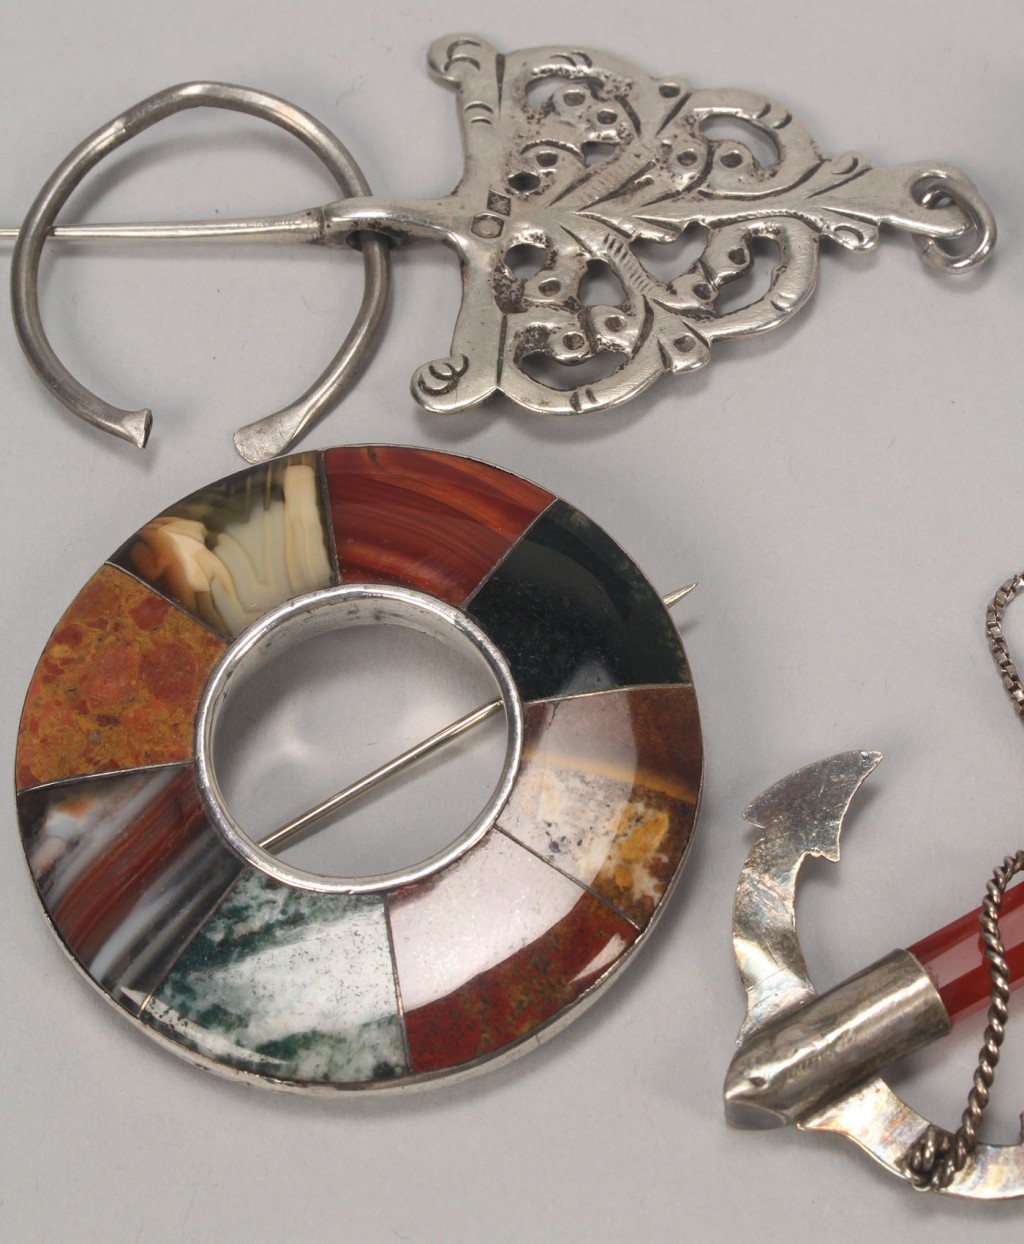 Lot 505: Group of Scottish style agate and silver jewelry